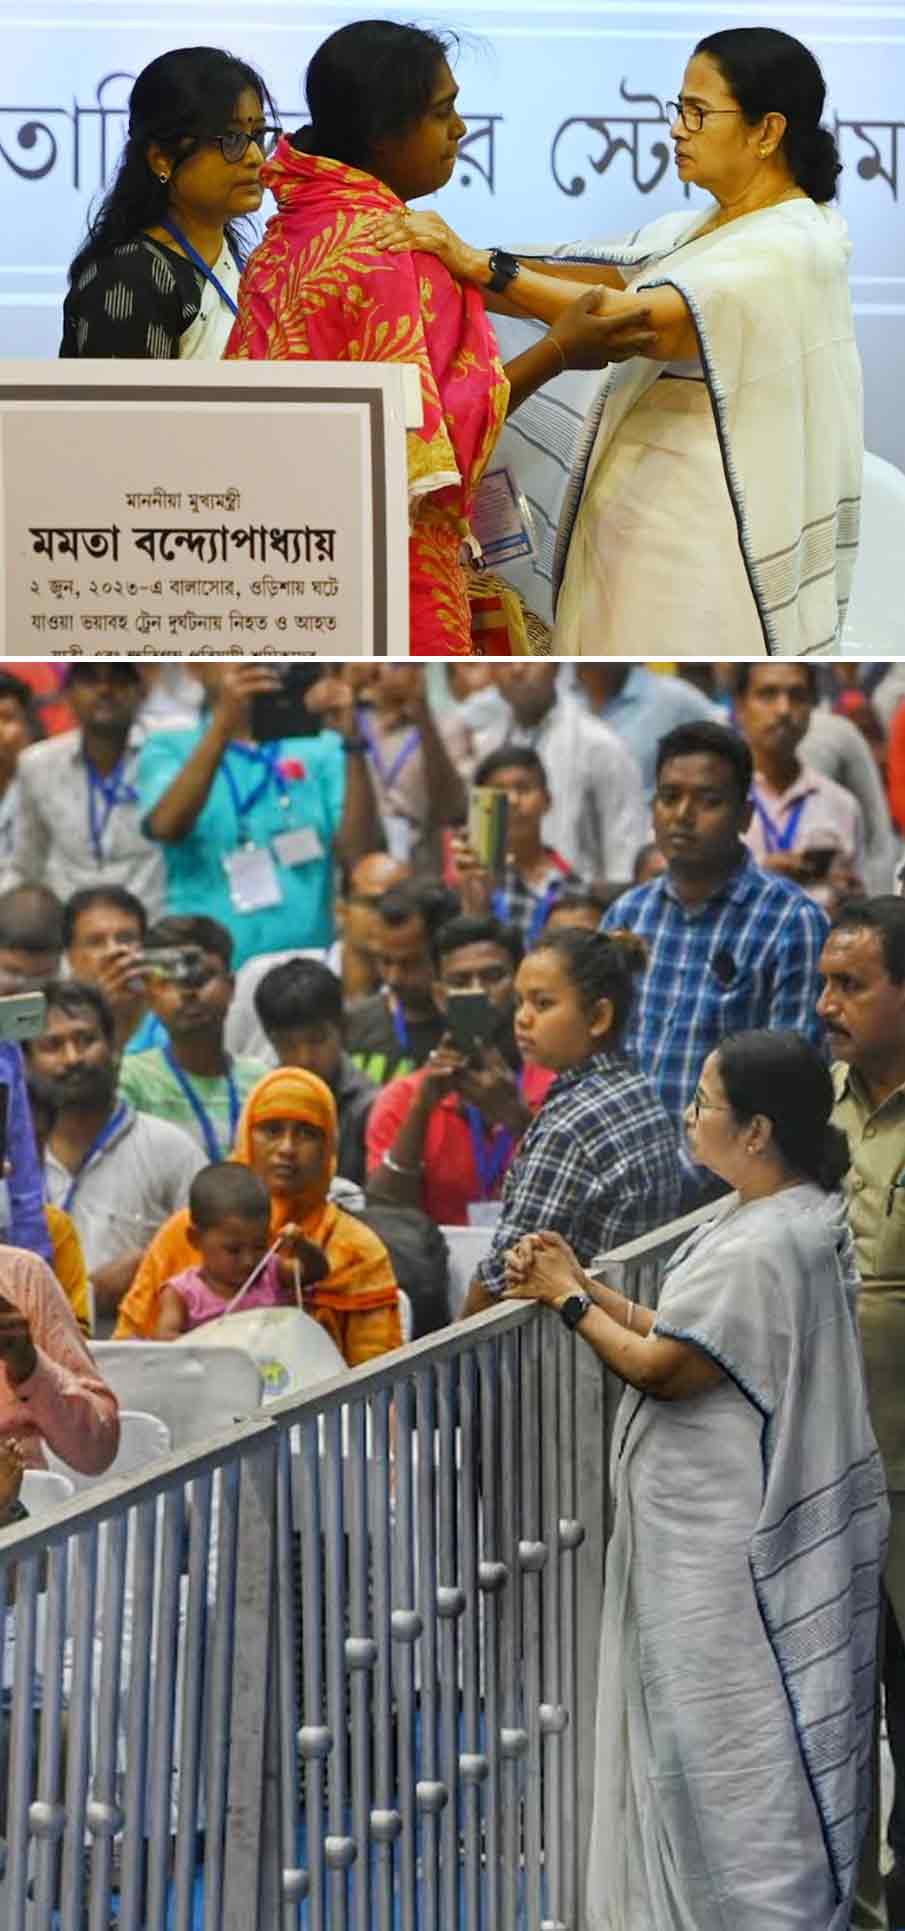 West Bengal chief minister Mamata Banerjee handed over cheques to those who were injured in the Coromandel train mishap. Organised by the Department of Labour, the event was held at the Netaji Indoor stadium on Wednesday 